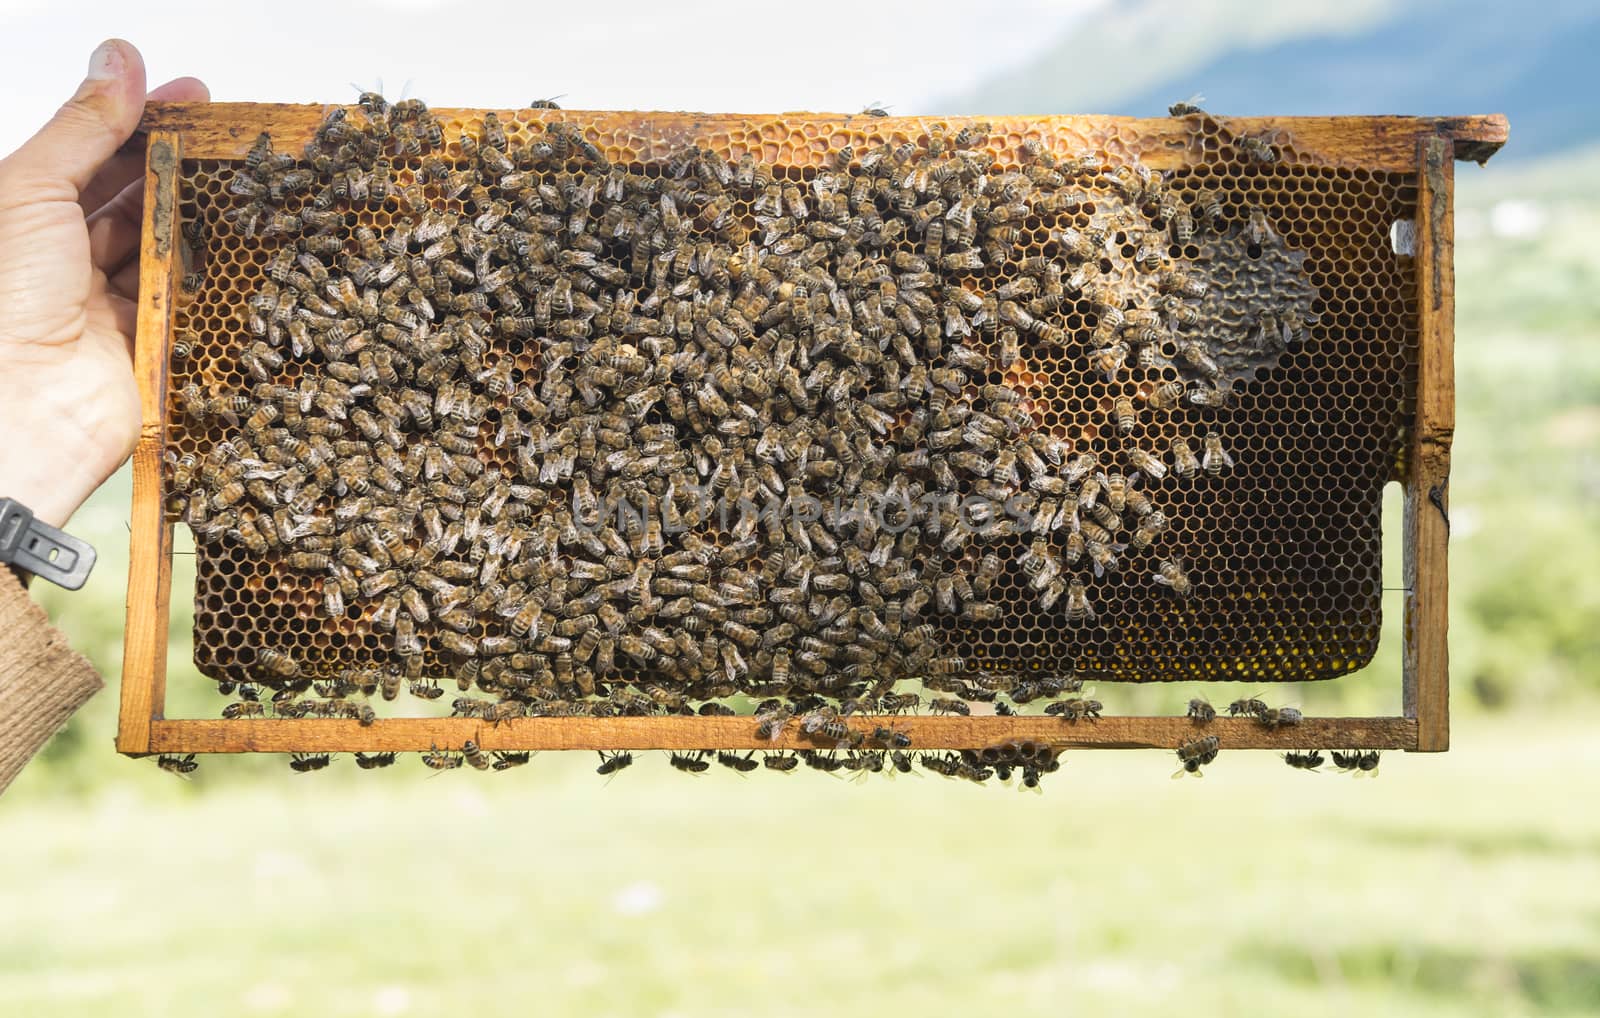 bees work on Honeycomb